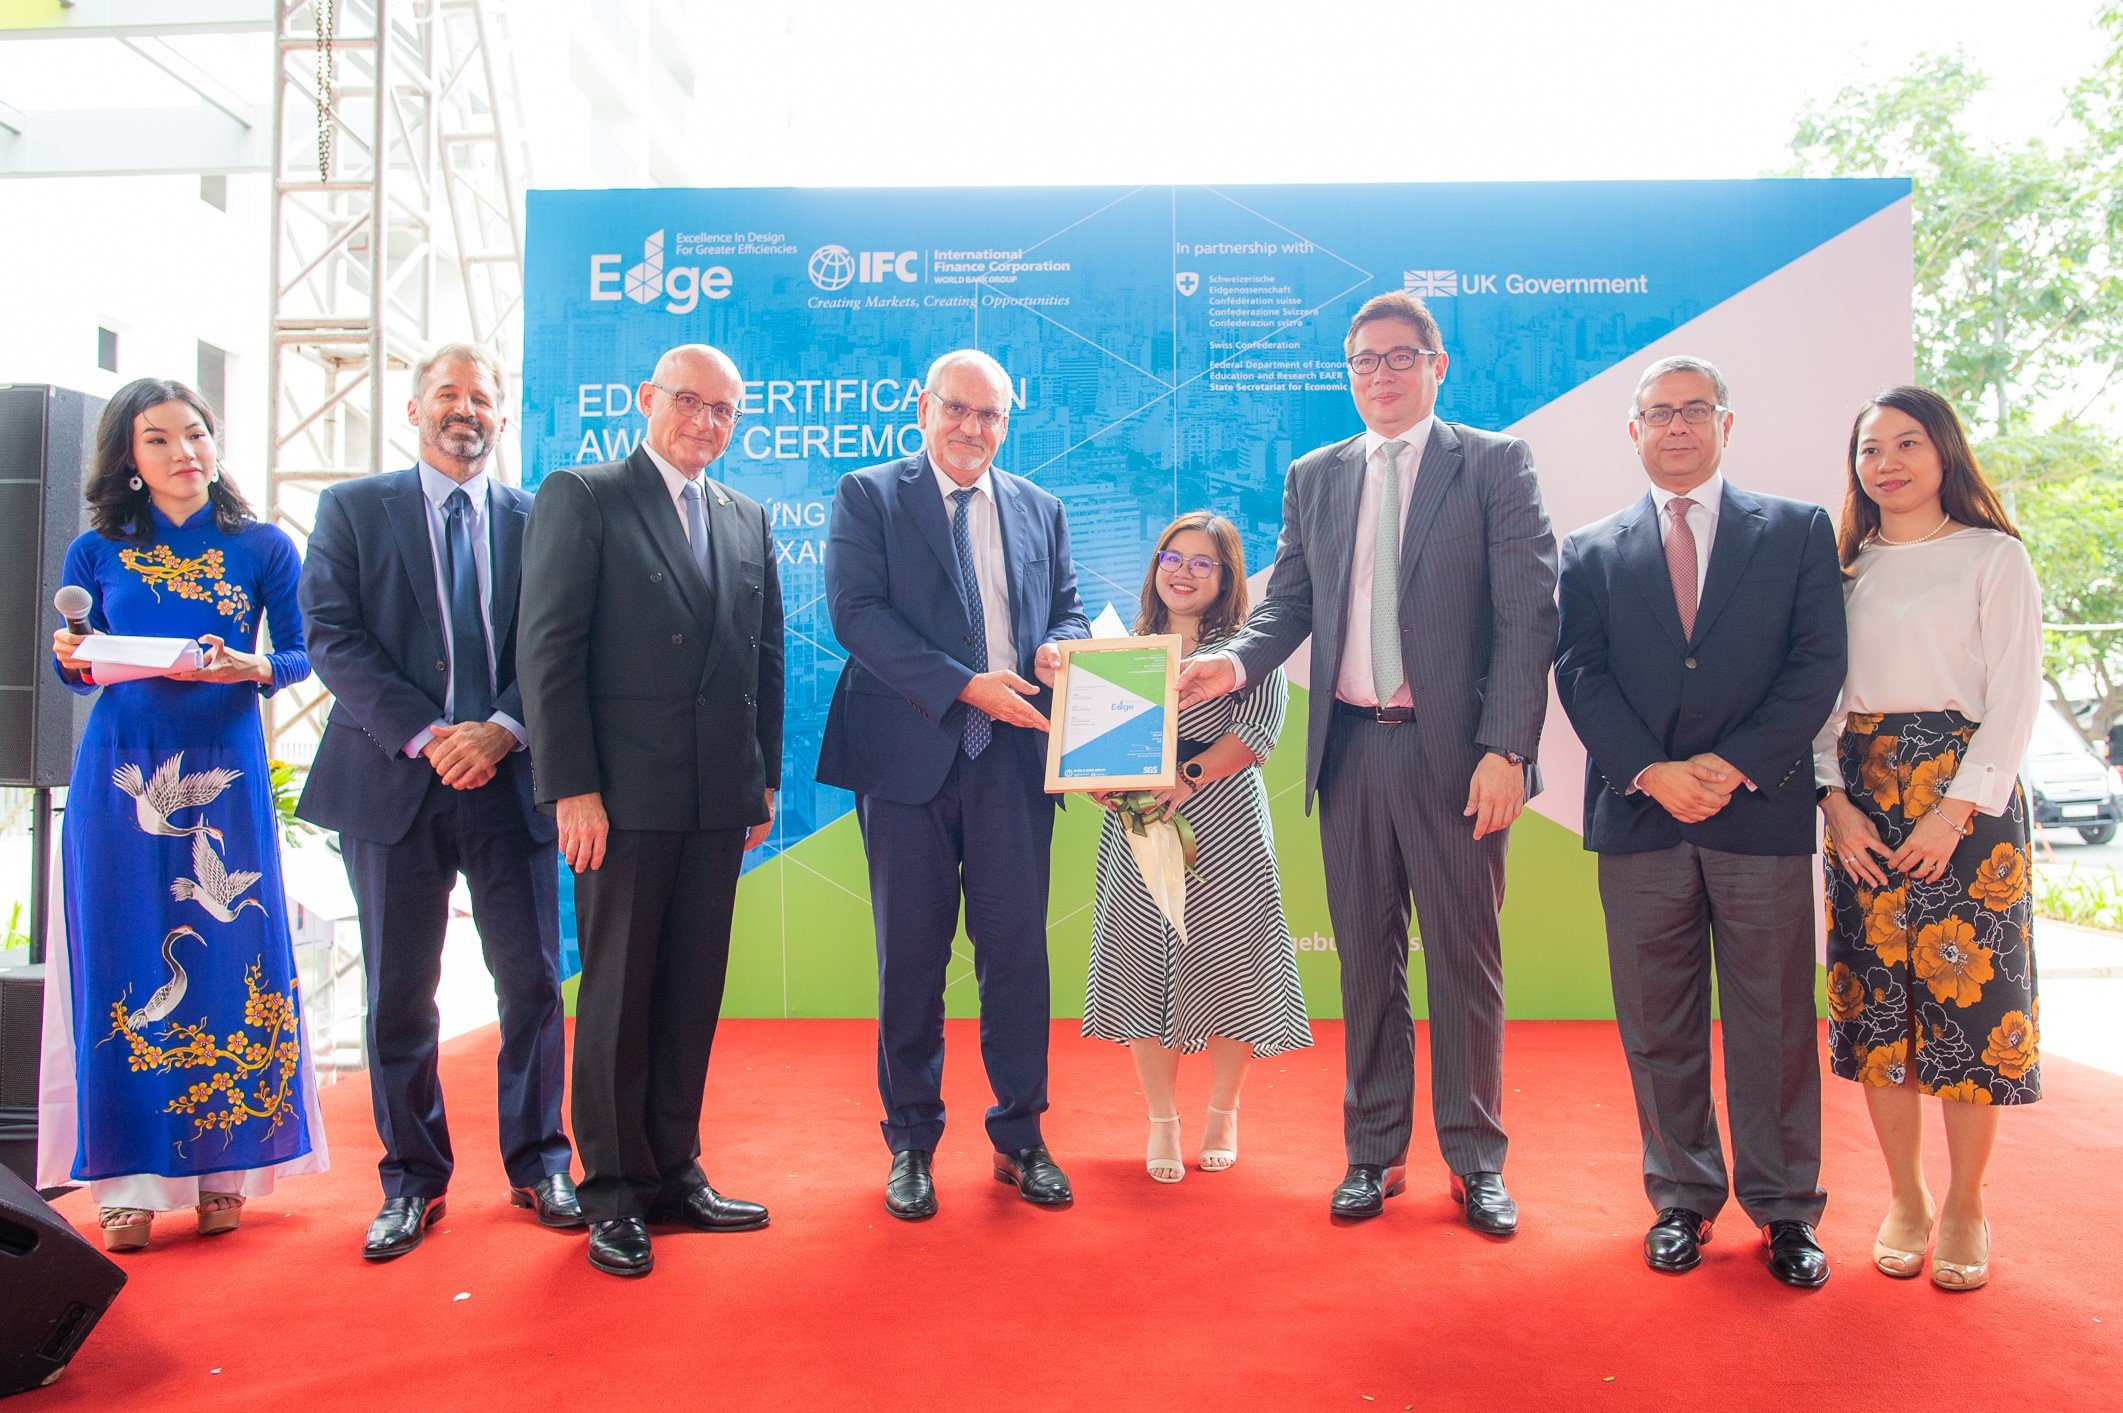 HausNeo, developed by the EZ Land Vietnam Development JSC, has received final EDGE certification. The certificate was presented by Philippe Le Houérou, IFC CEO.